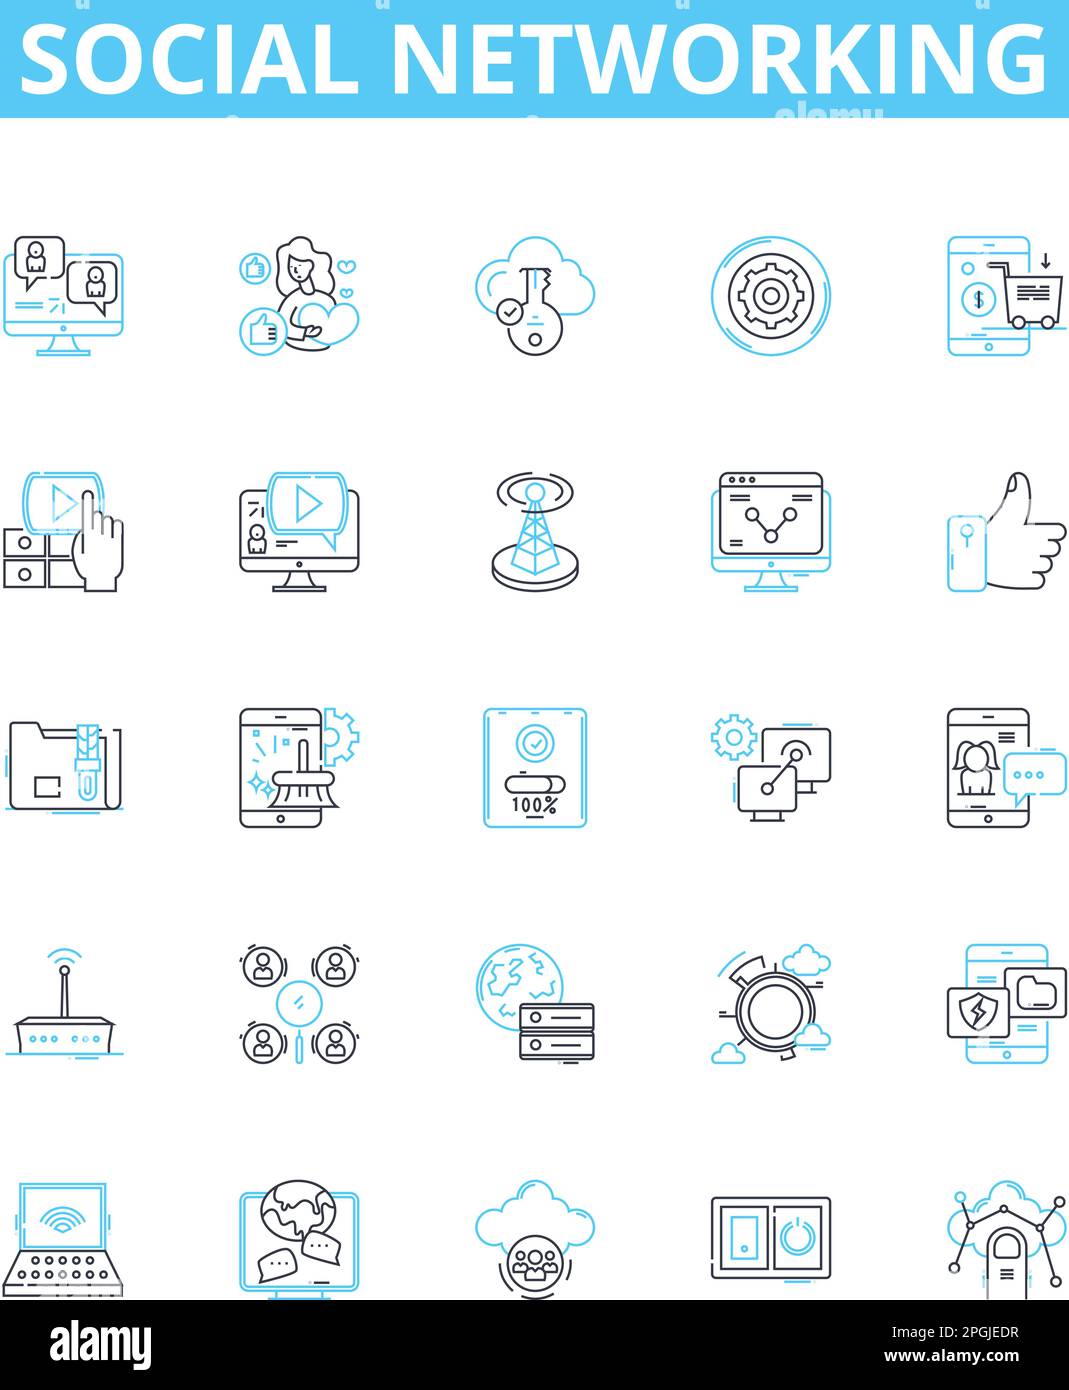 Social networking vector line icons set. Social, networking, networking, sites, media, profiles, interaction illustration outline concept symbols and Stock Vector